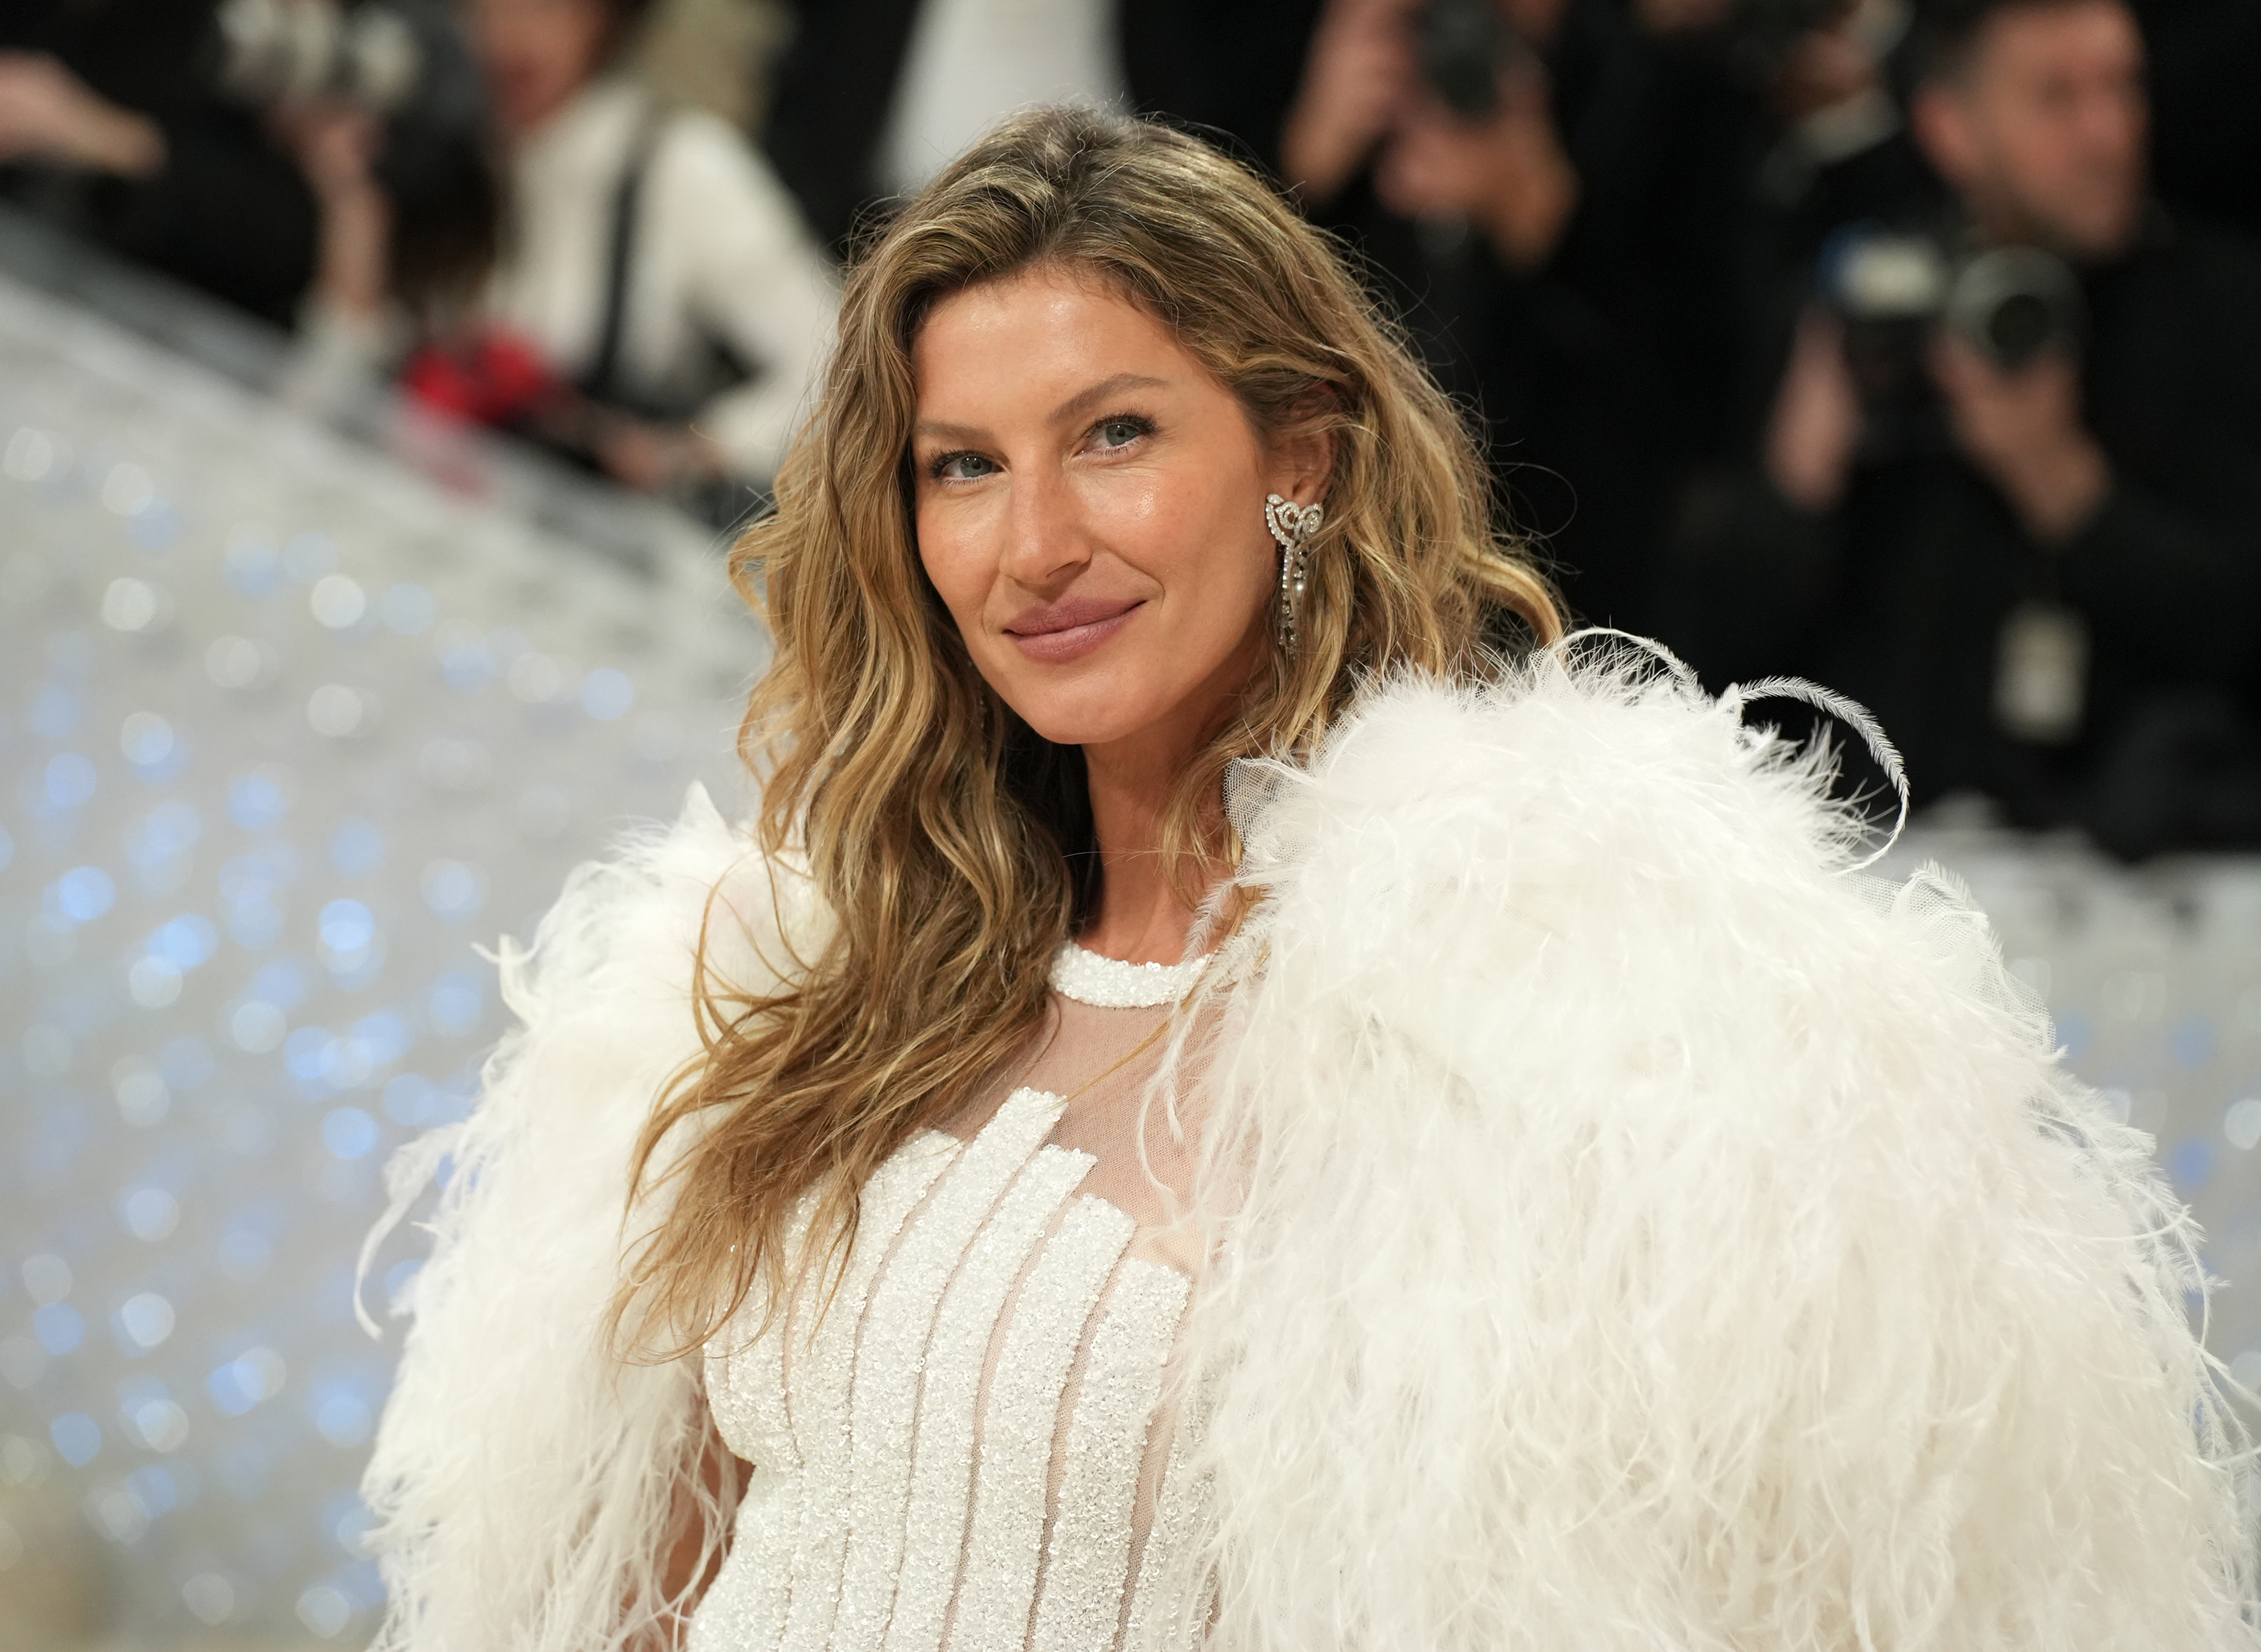 Close-up of Gisele at a media event